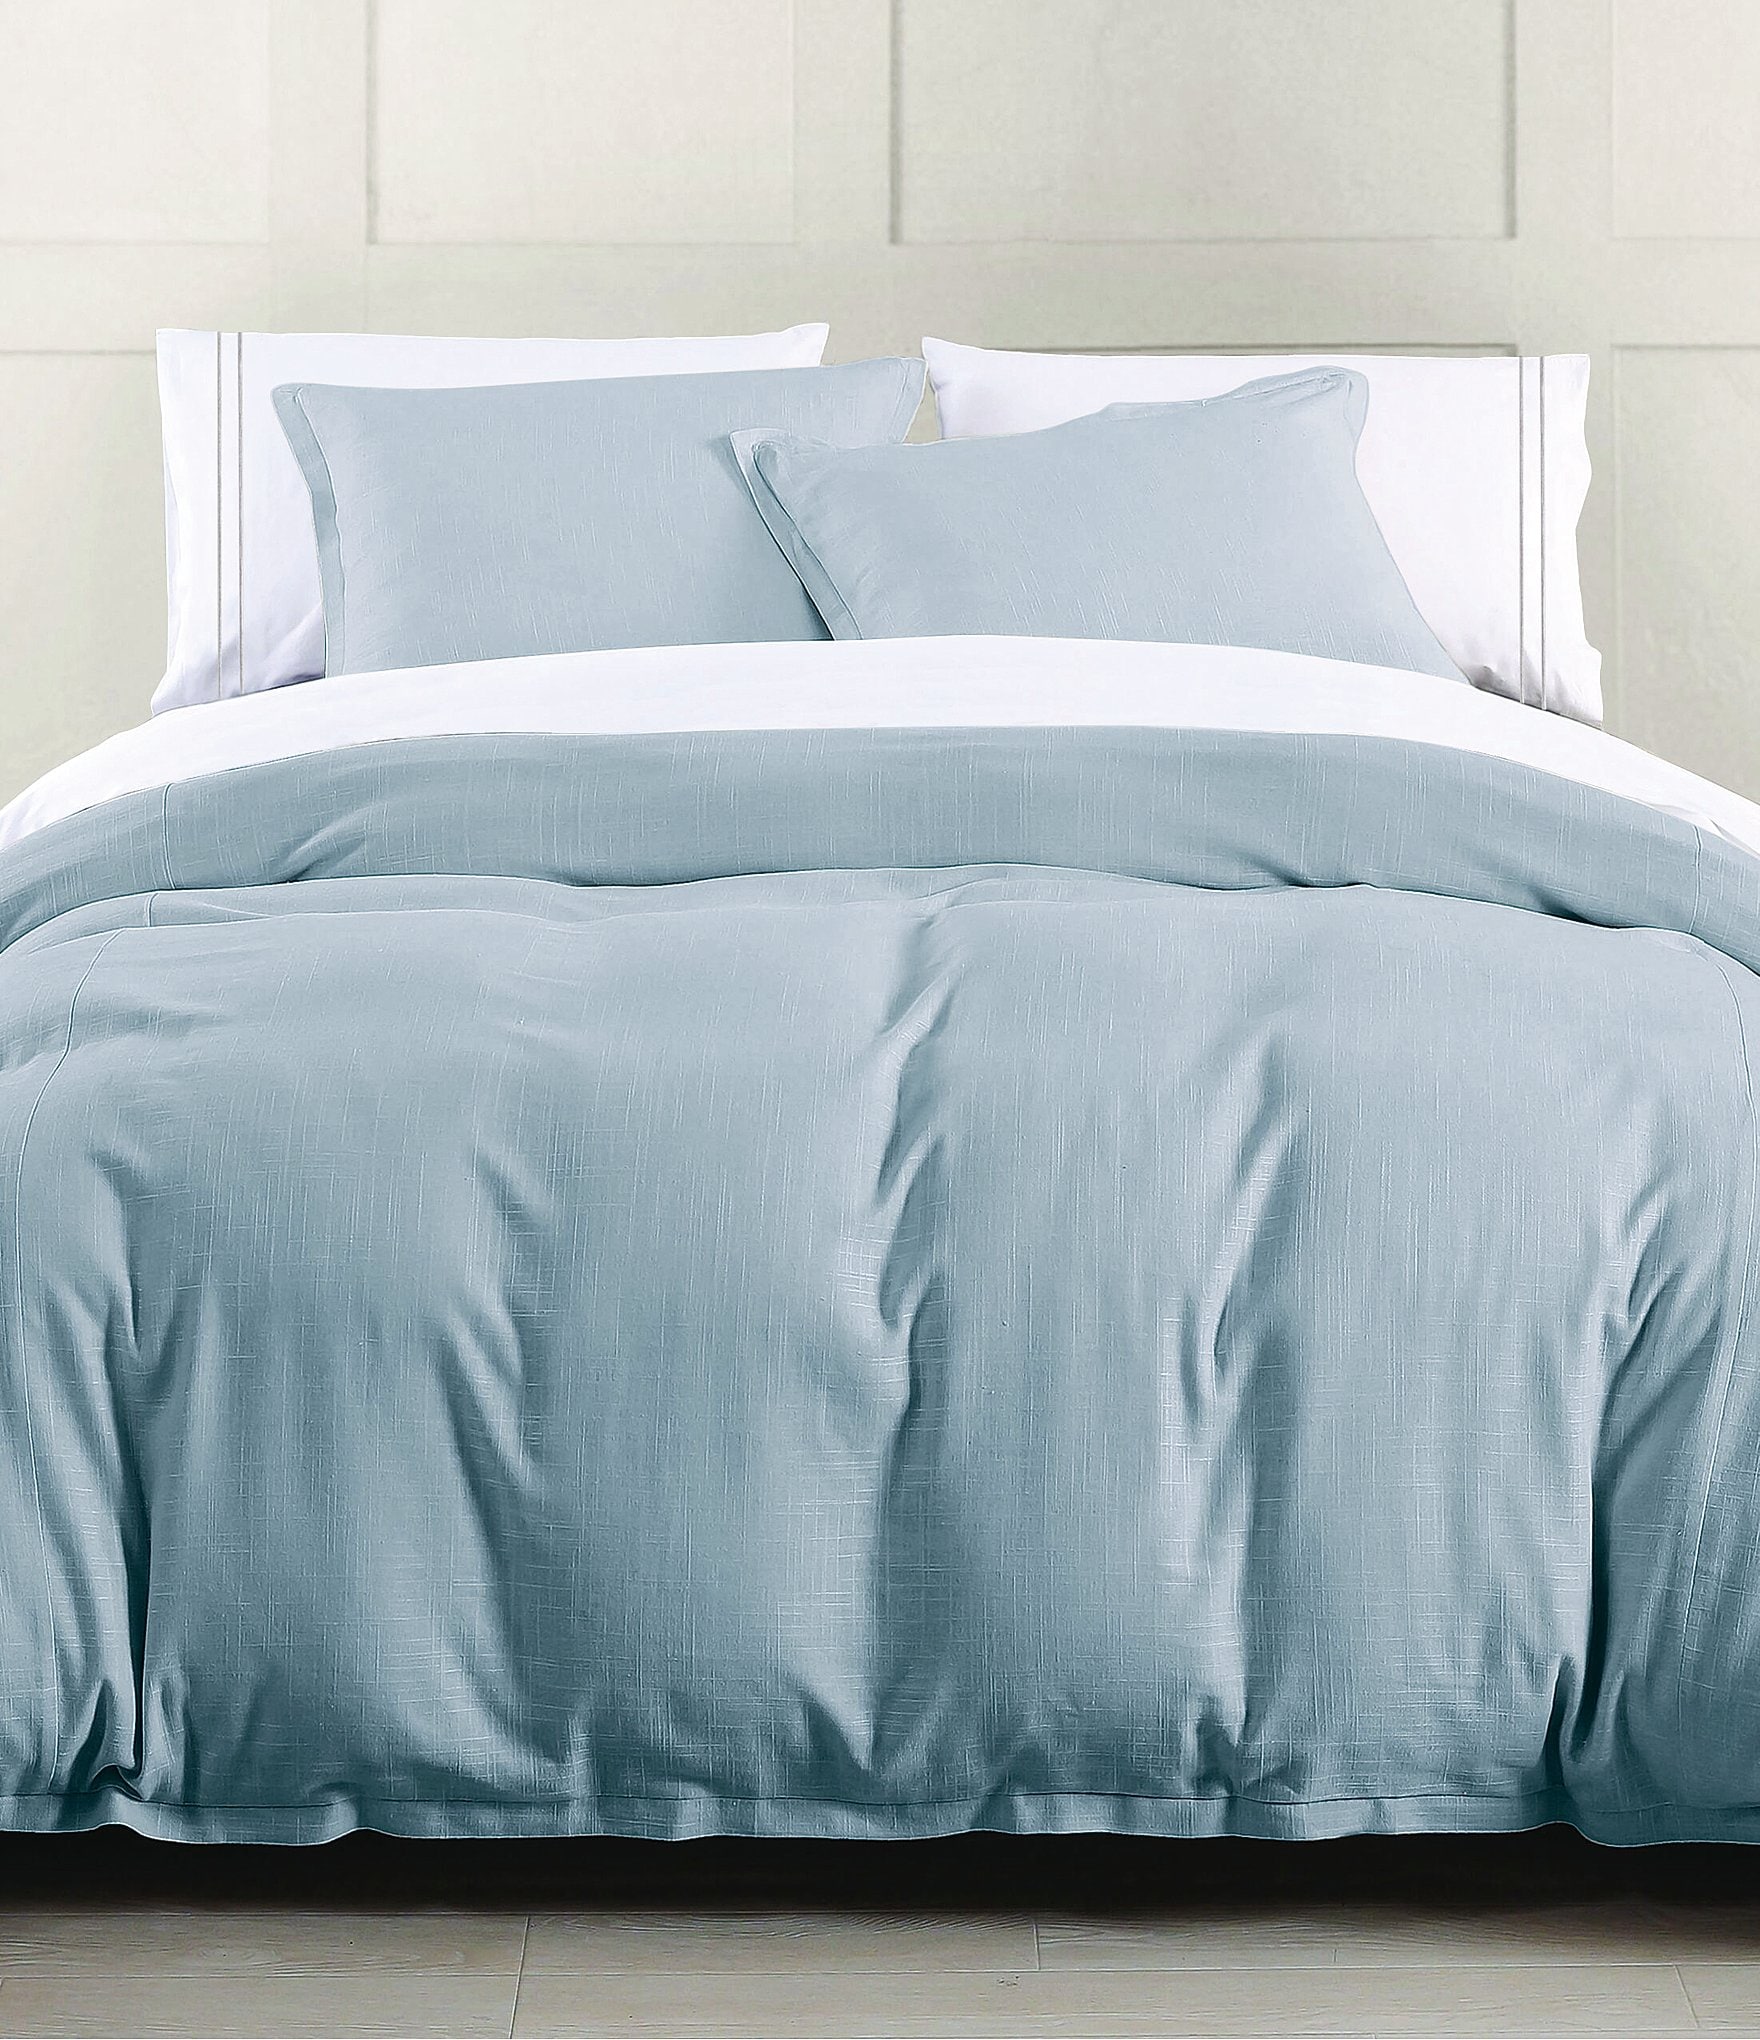 Duvet cover at discount prices - MaxxiDiscount